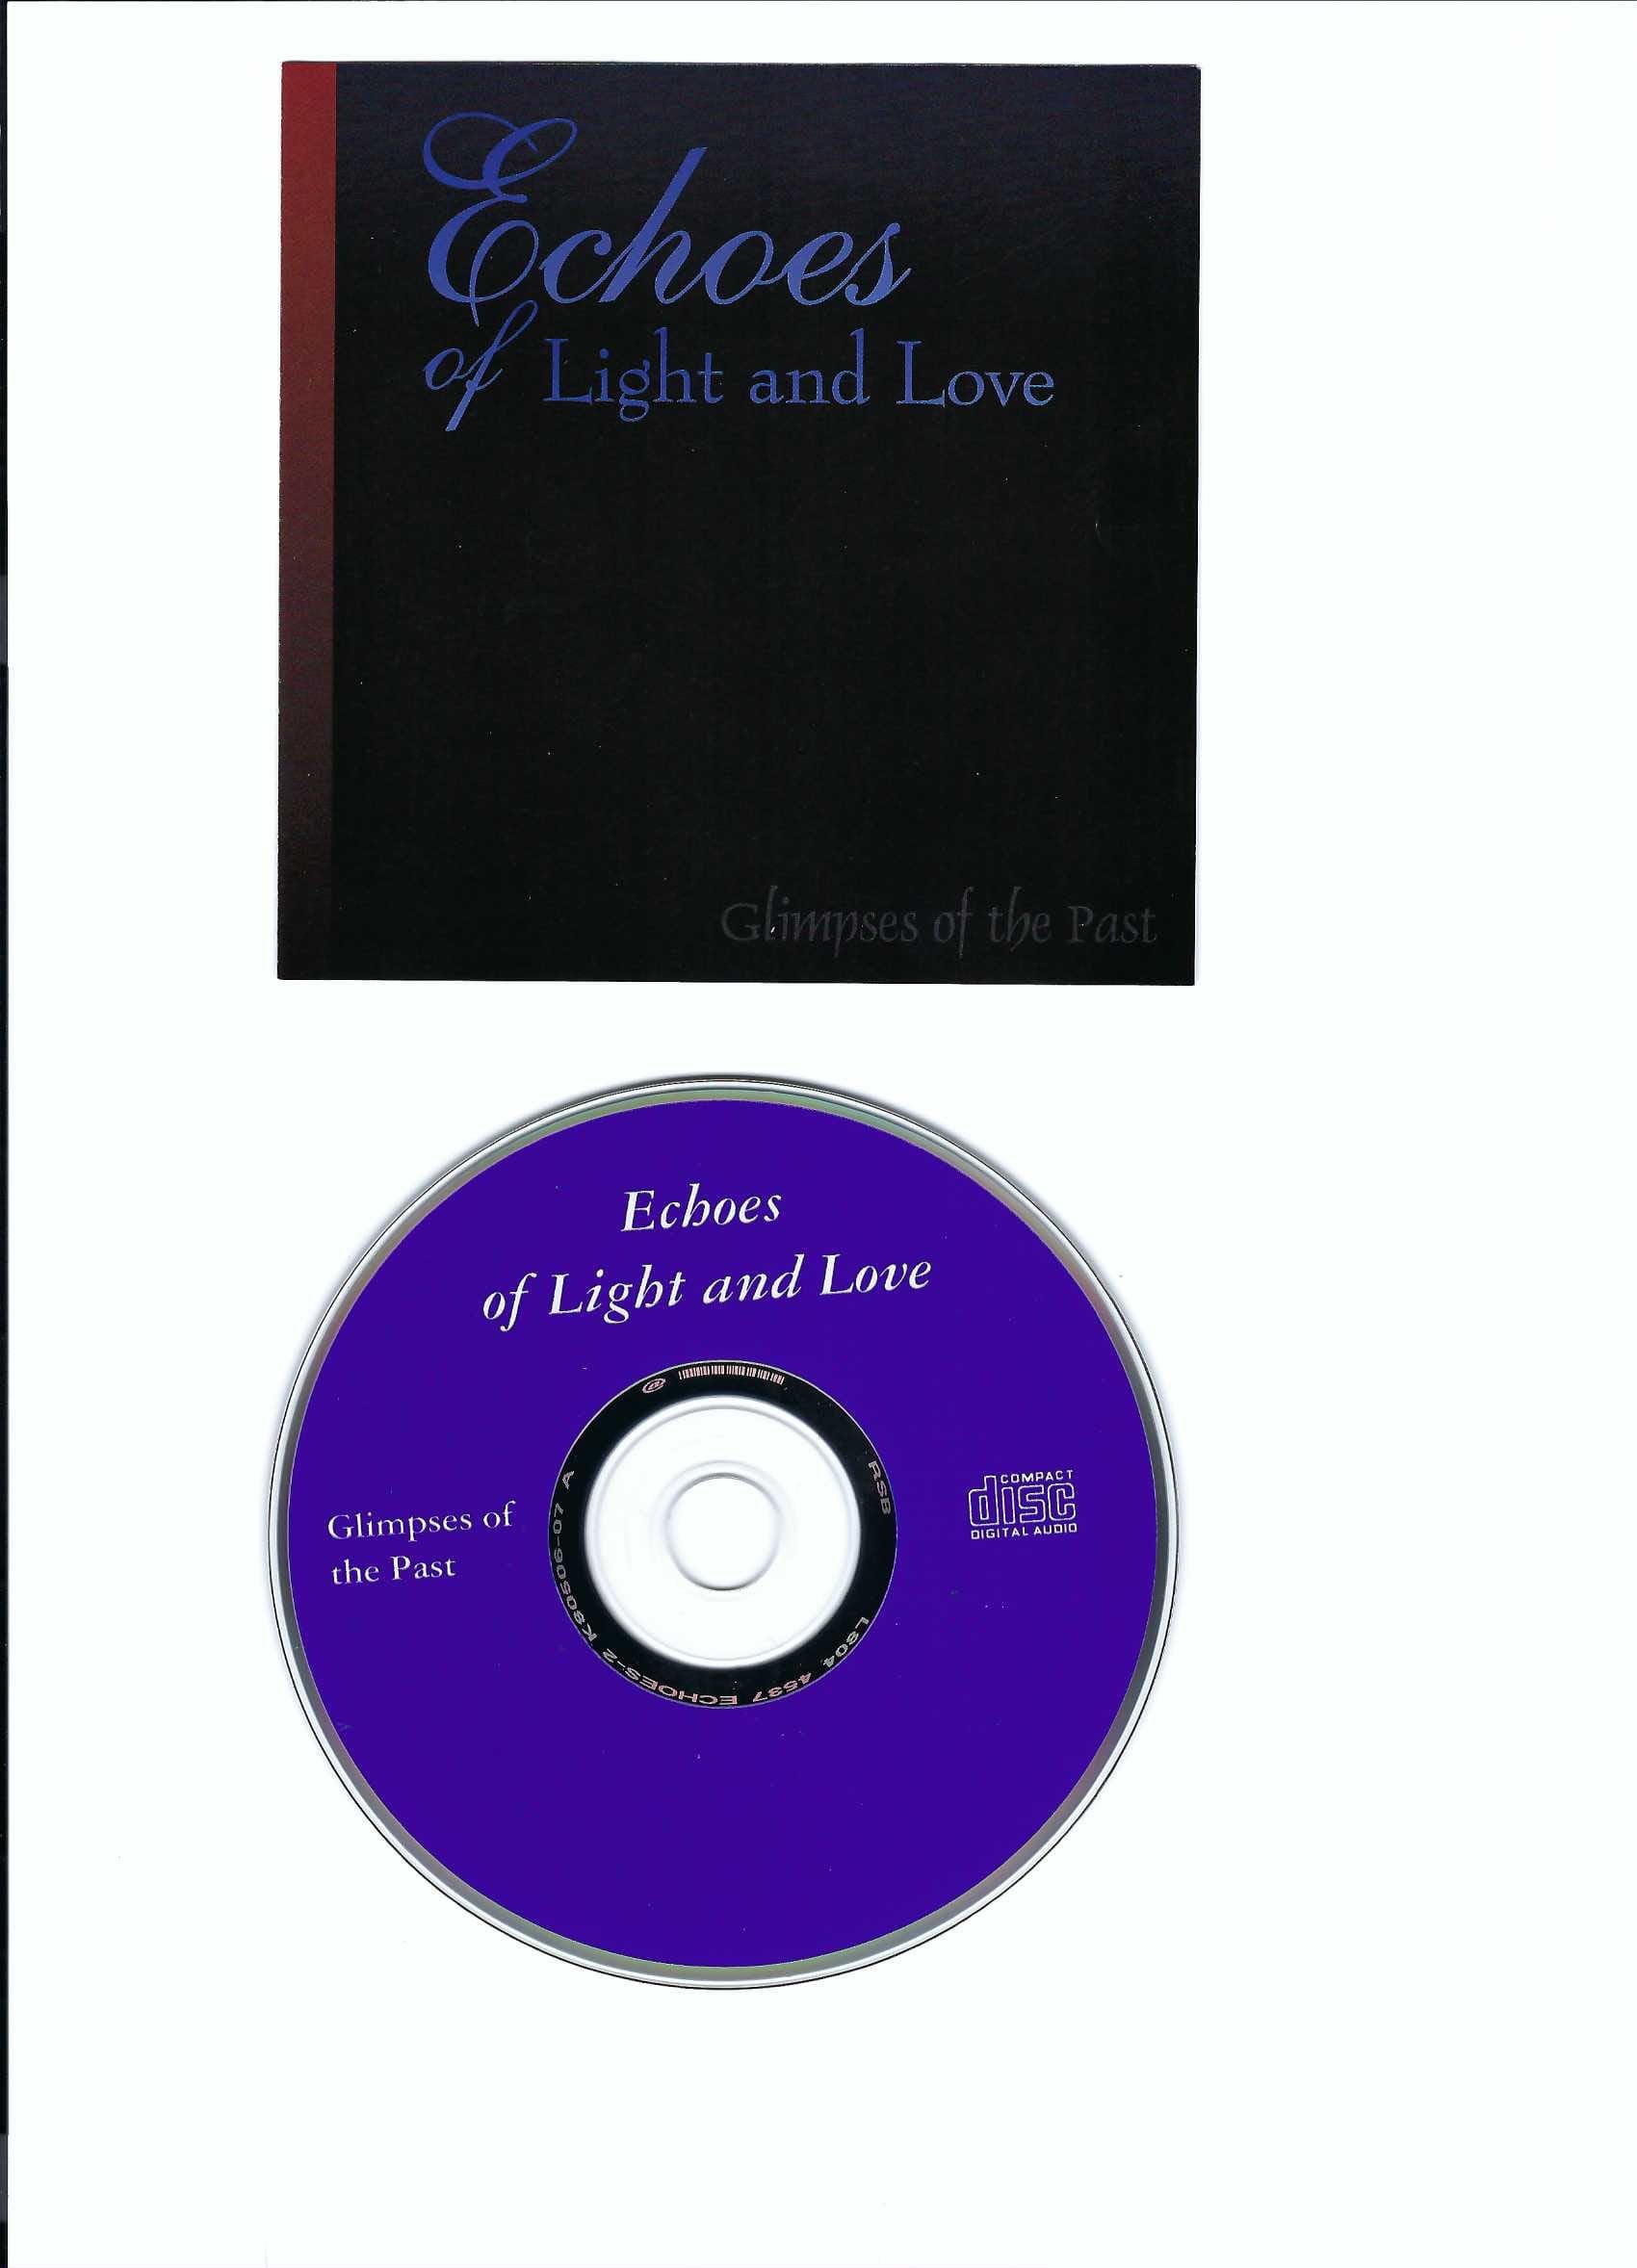 Echoes Of Light and Love by Glimpses of the Past